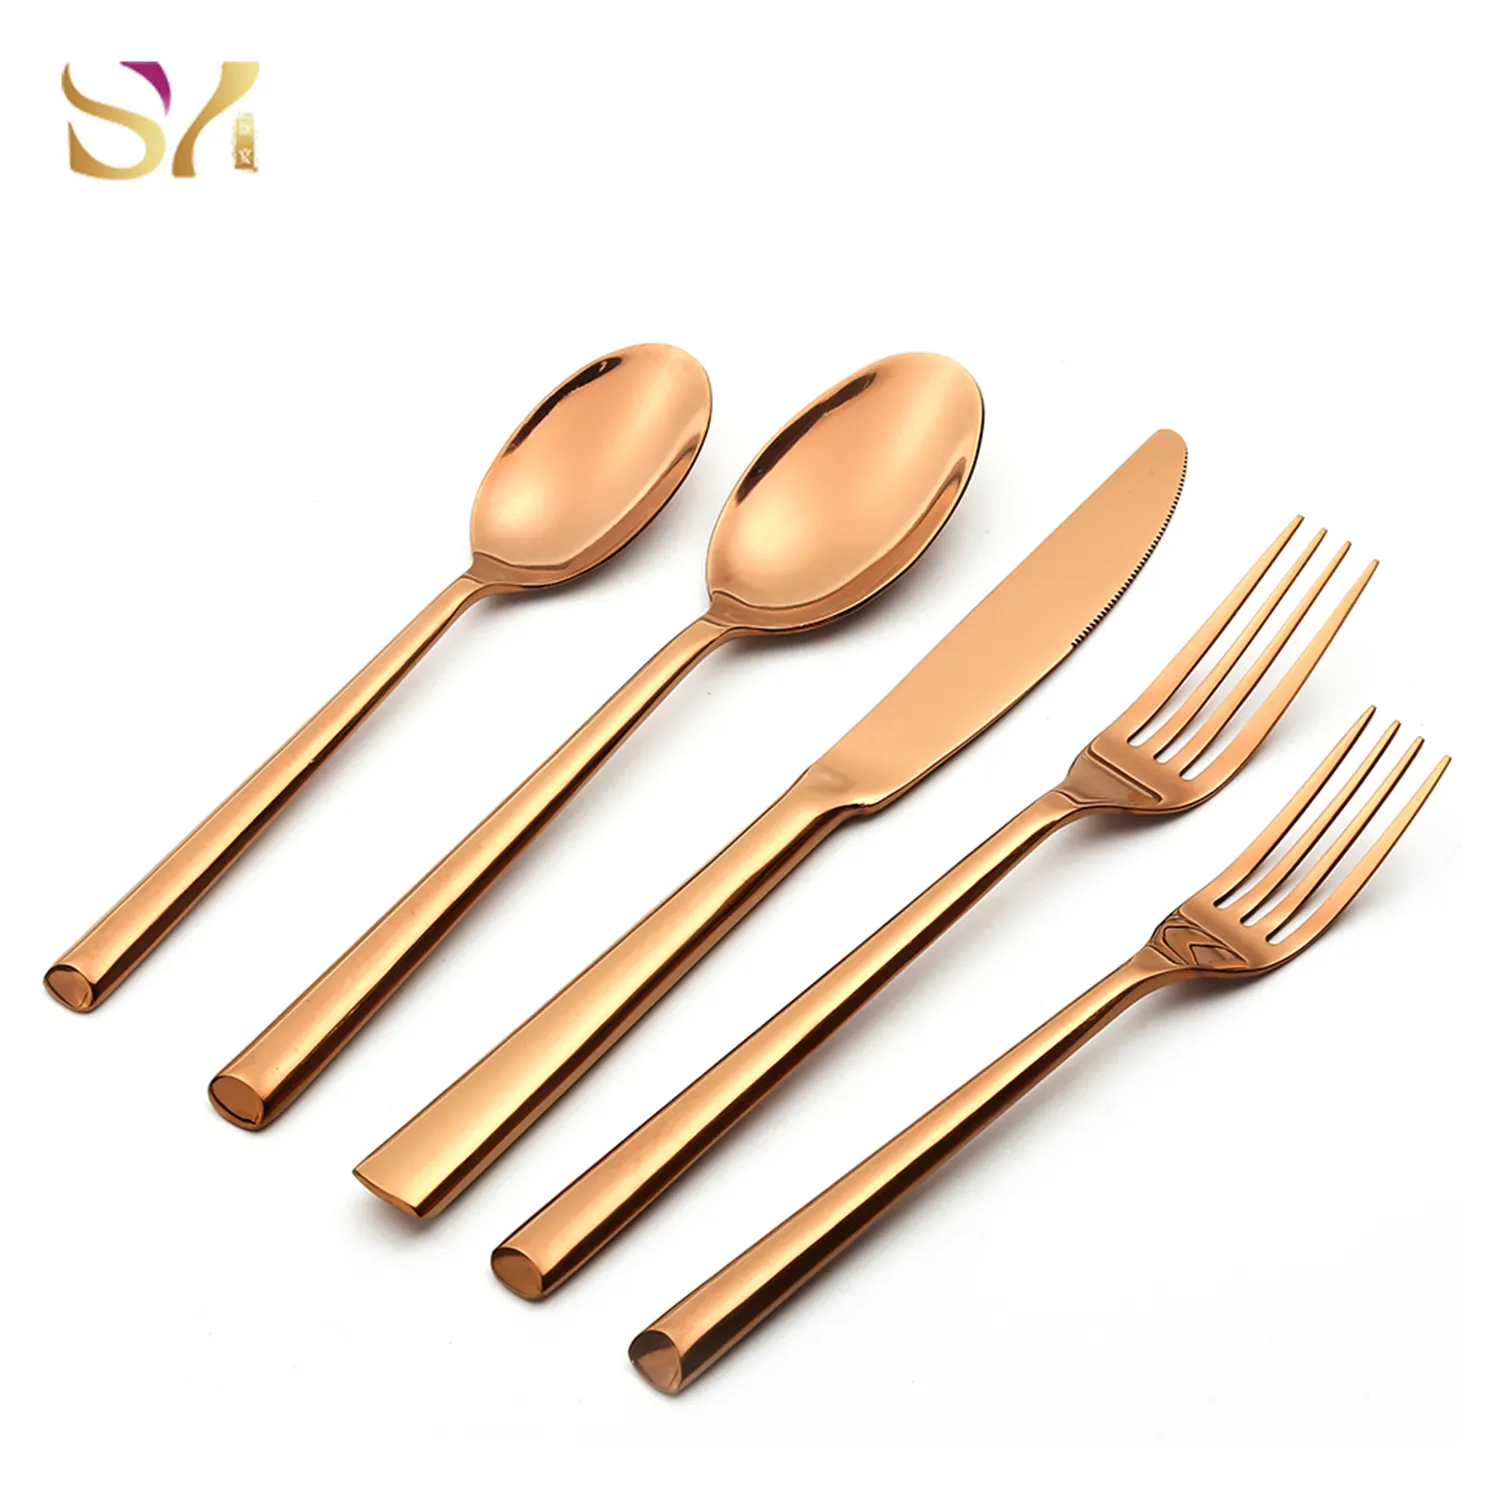 Bulk hand forged stainless gold and white handle cutlery flatware set with spoon fork knife for restaurant